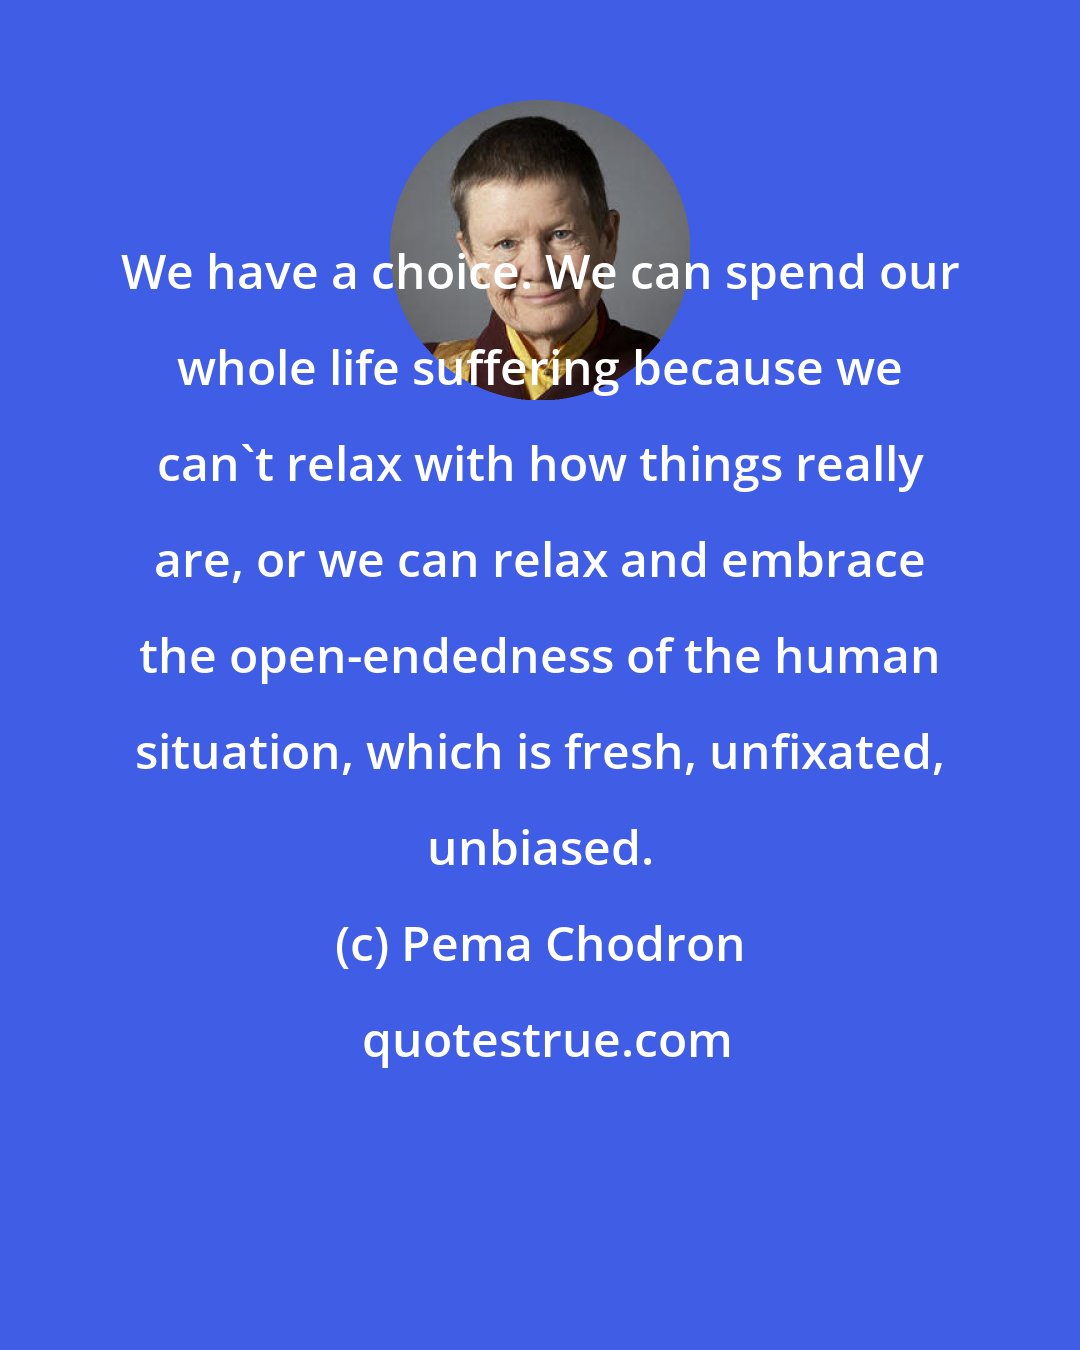 Pema Chodron: We have a choice. We can spend our whole life suffering because we can't relax with how things really are, or we can relax and embrace the open-endedness of the human situation, which is fresh, unfixated, unbiased.